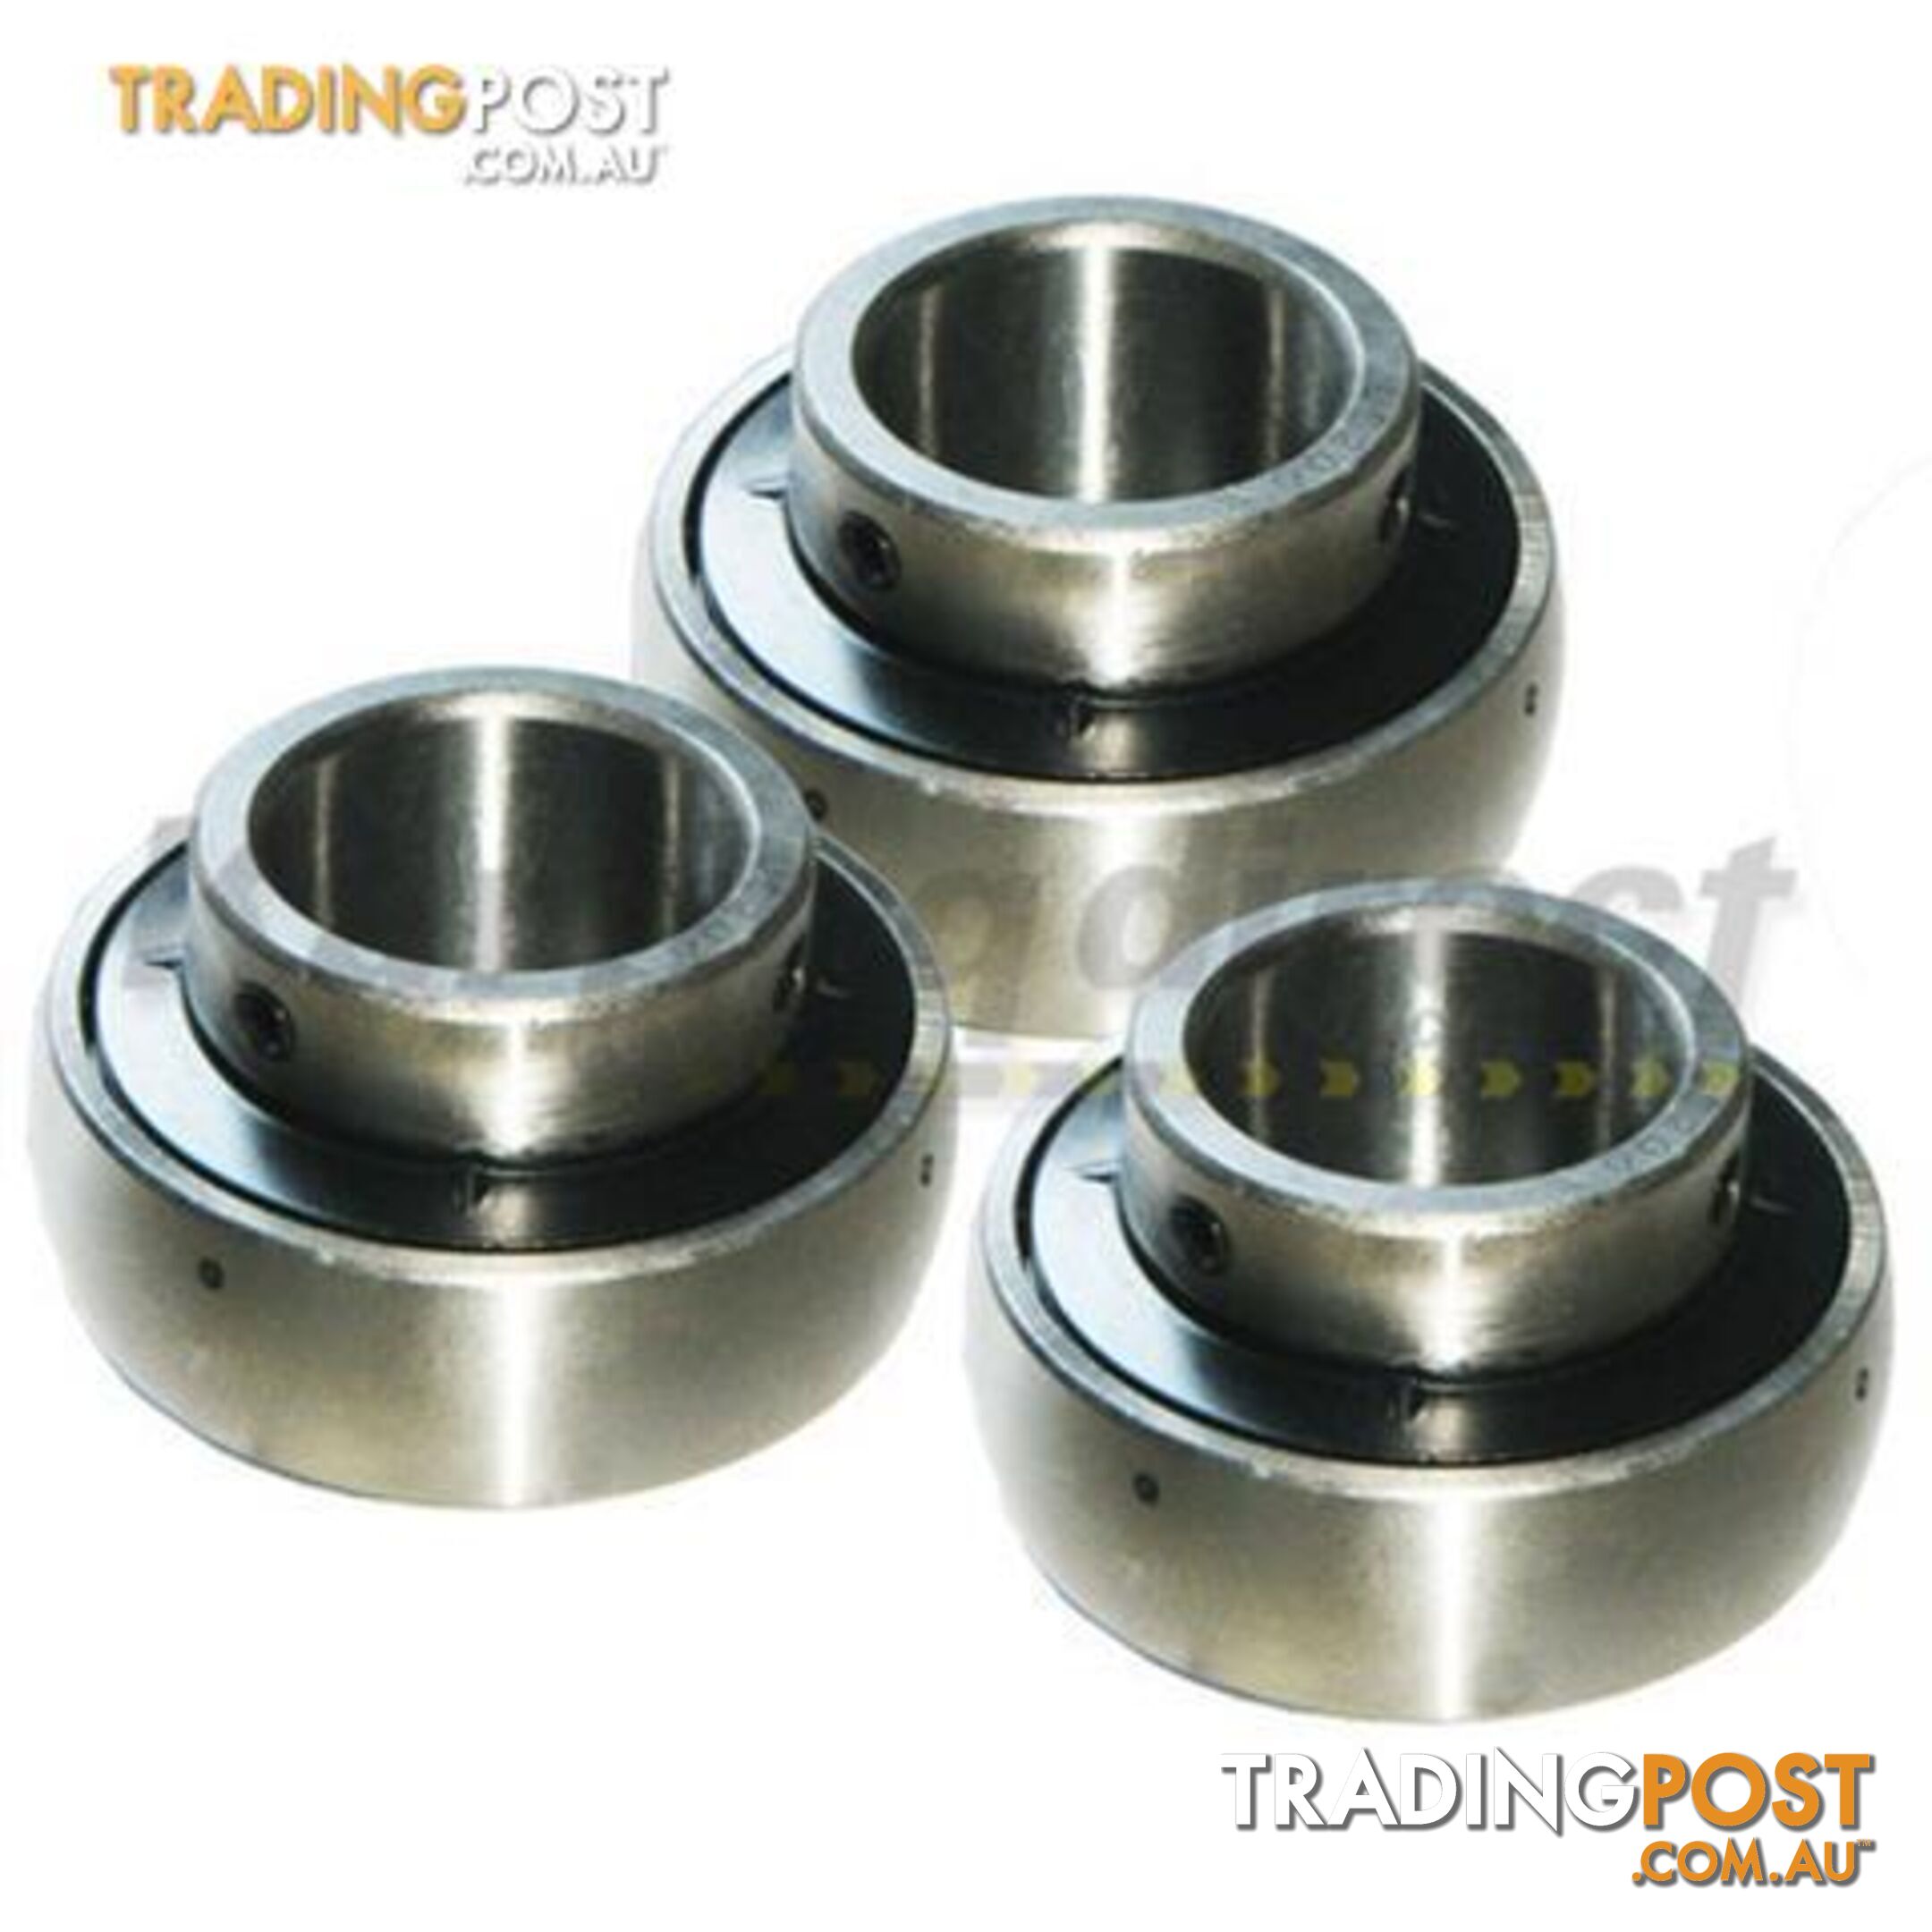 Go Kart Bearing 30mm Axle Sealed. These are heavy duty rubber lip seal bearings. Great for dirt or wet weather. - ALL BRAND NEW !!!